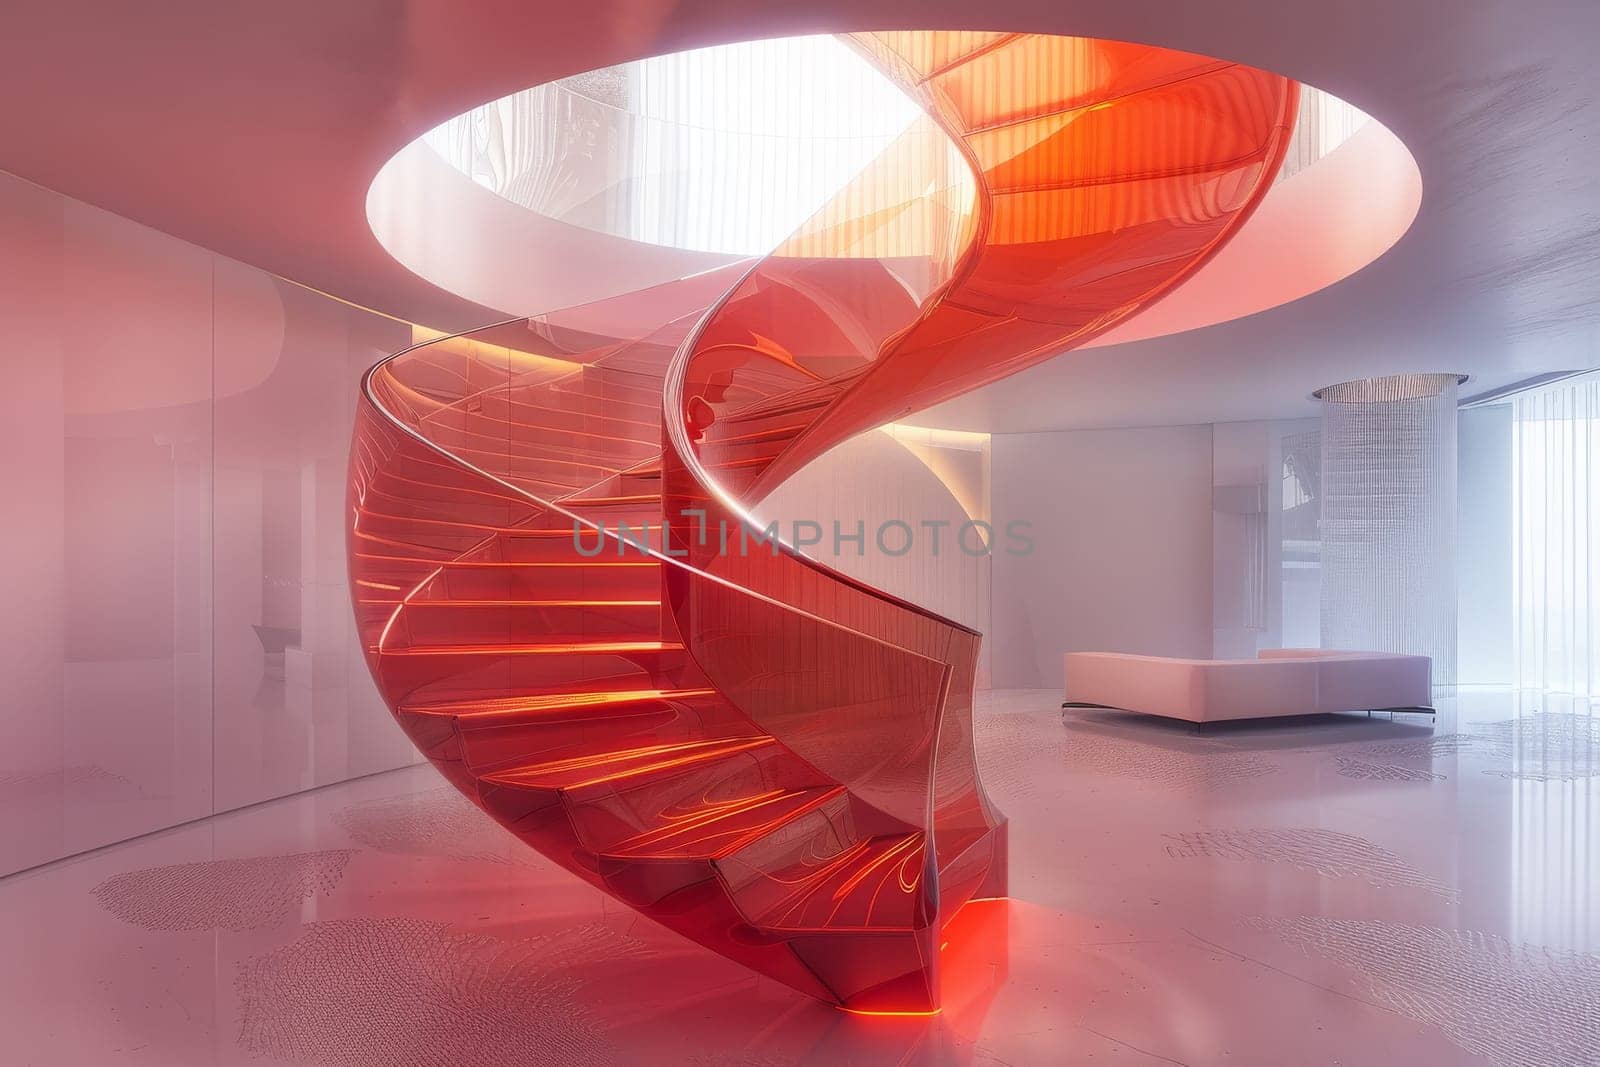 A spiral staircase with red steps is lit up and is the focal point of the room by itchaznong